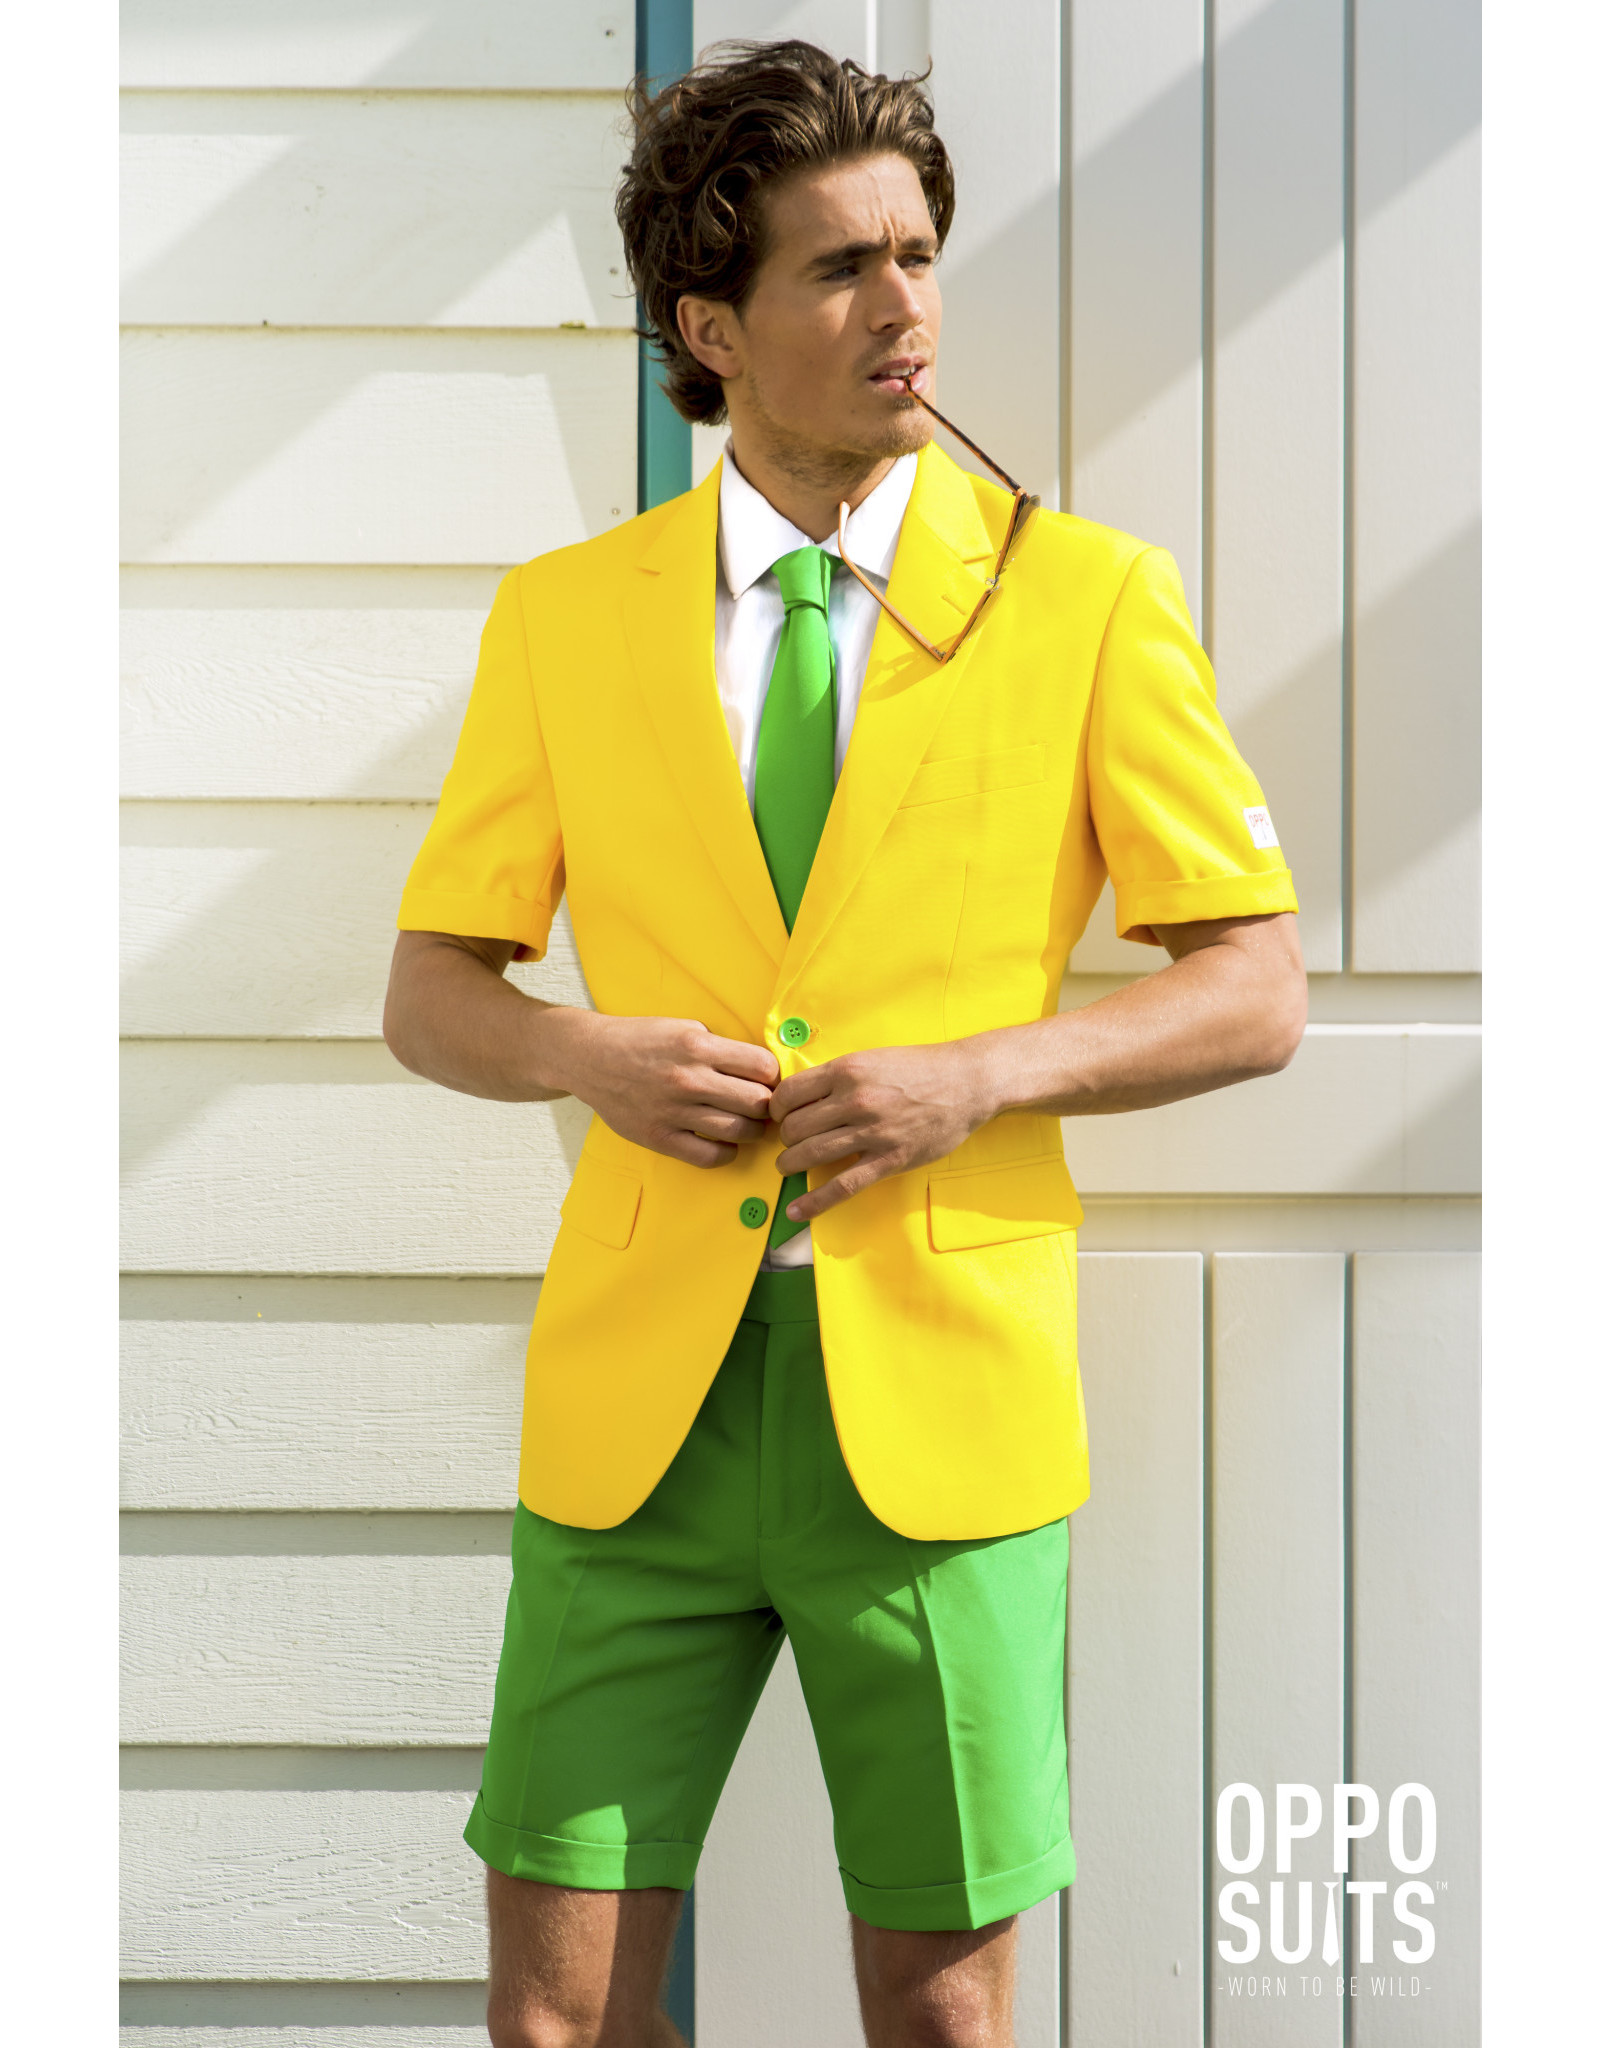 Opposuits Summer Green and Gold